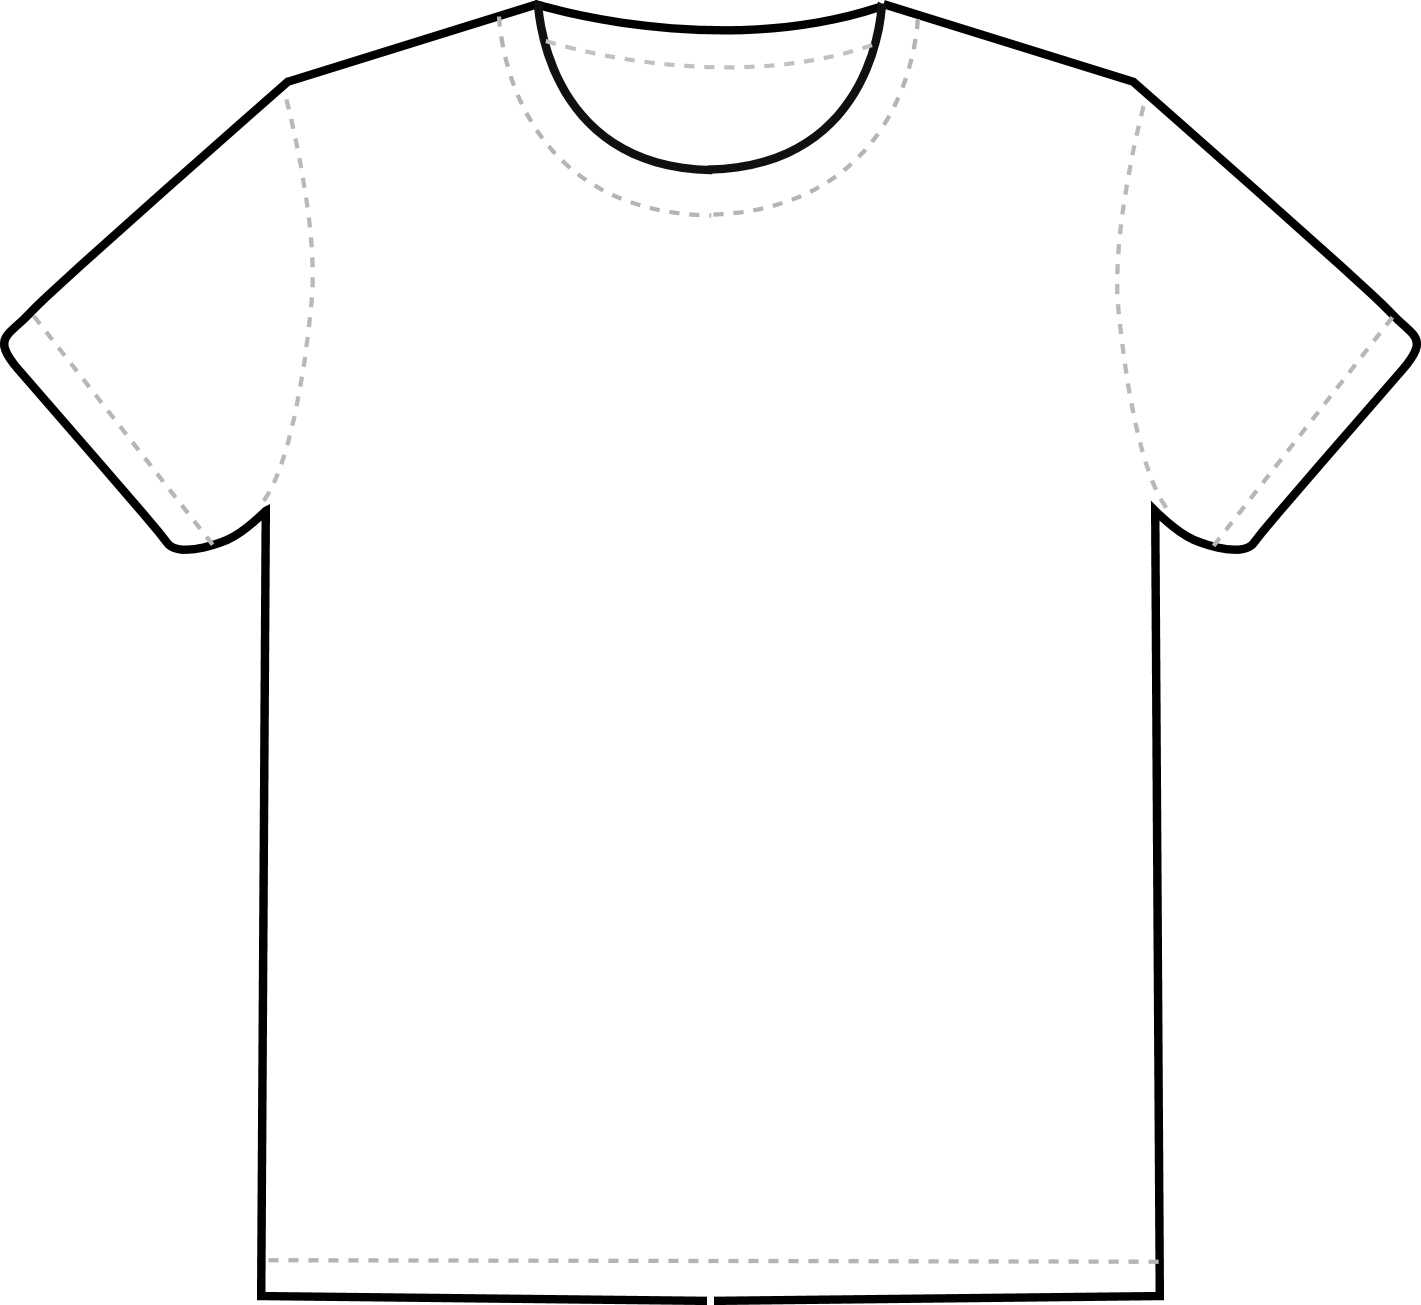 Free Blank T Shirt Outline, Download Free Clip Art, Free With Blank T ...